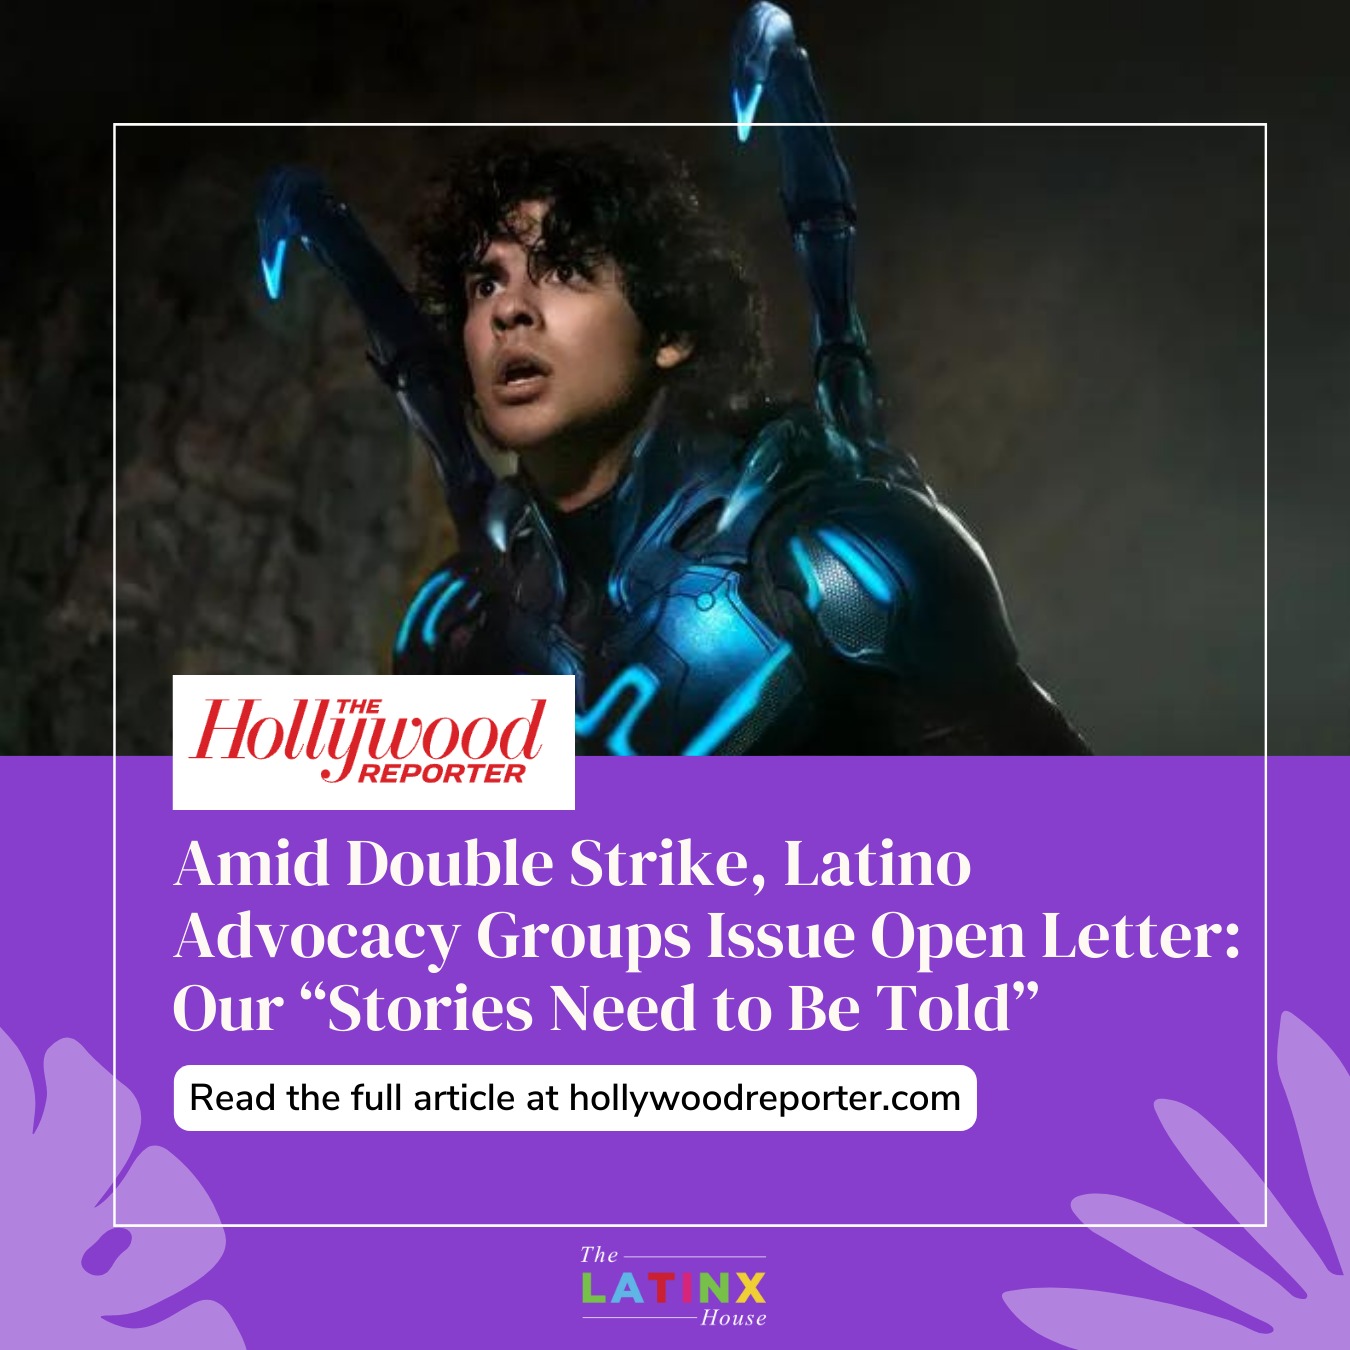 Amid Double Strike, Latino Advocacy Groups Issue Open Letter: Our “Stories Need to Be Told”